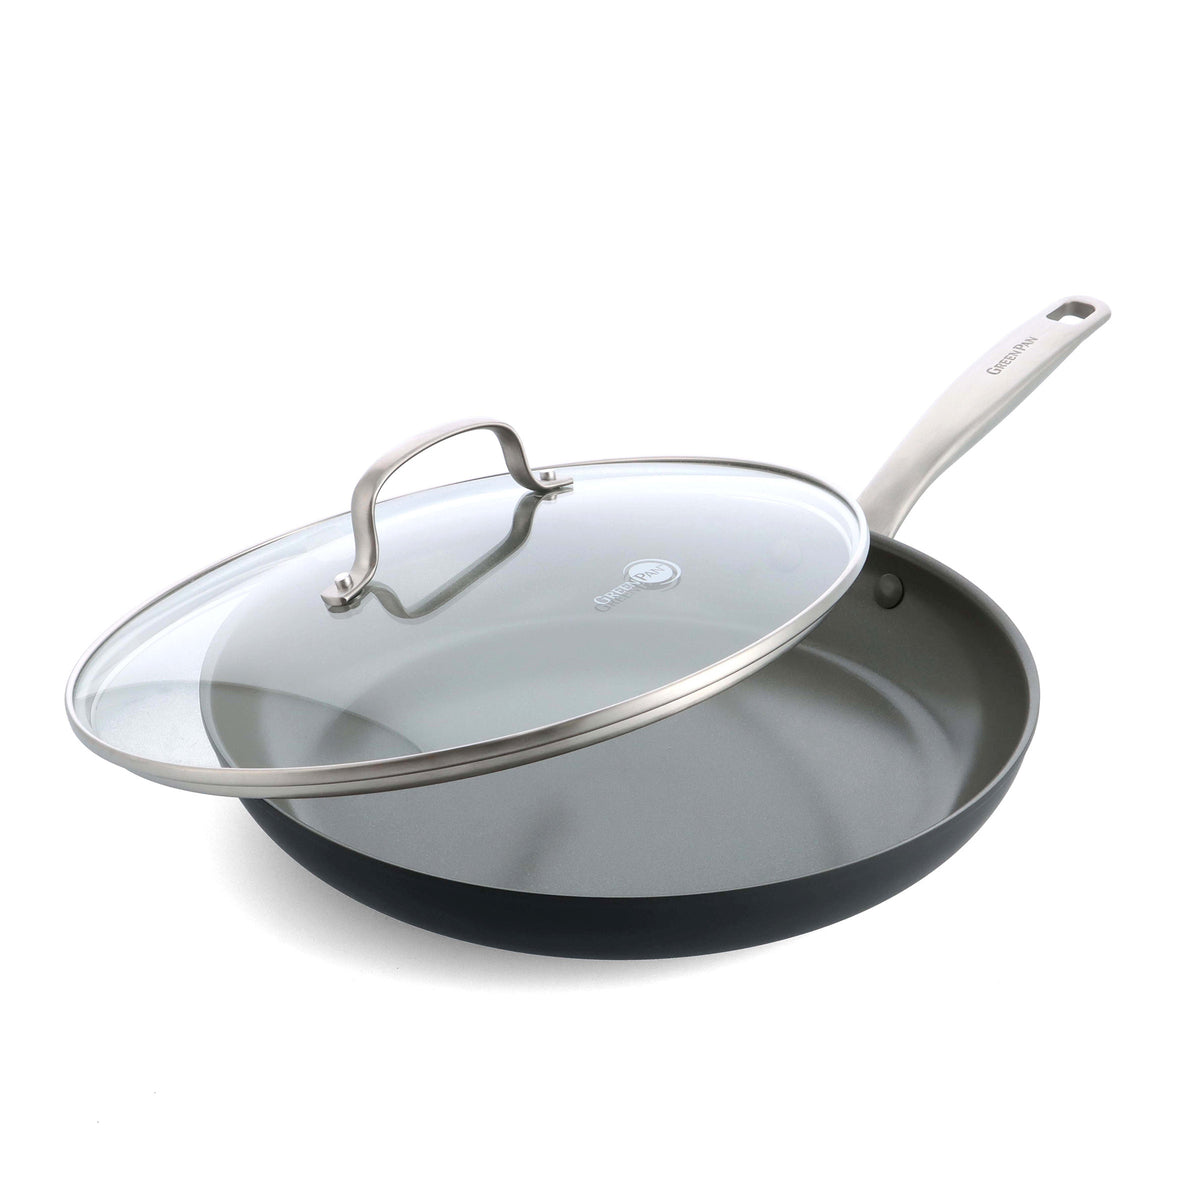 GreenPan Chatham 12 in. Stainless Steel Ceramic Nonstick Frying